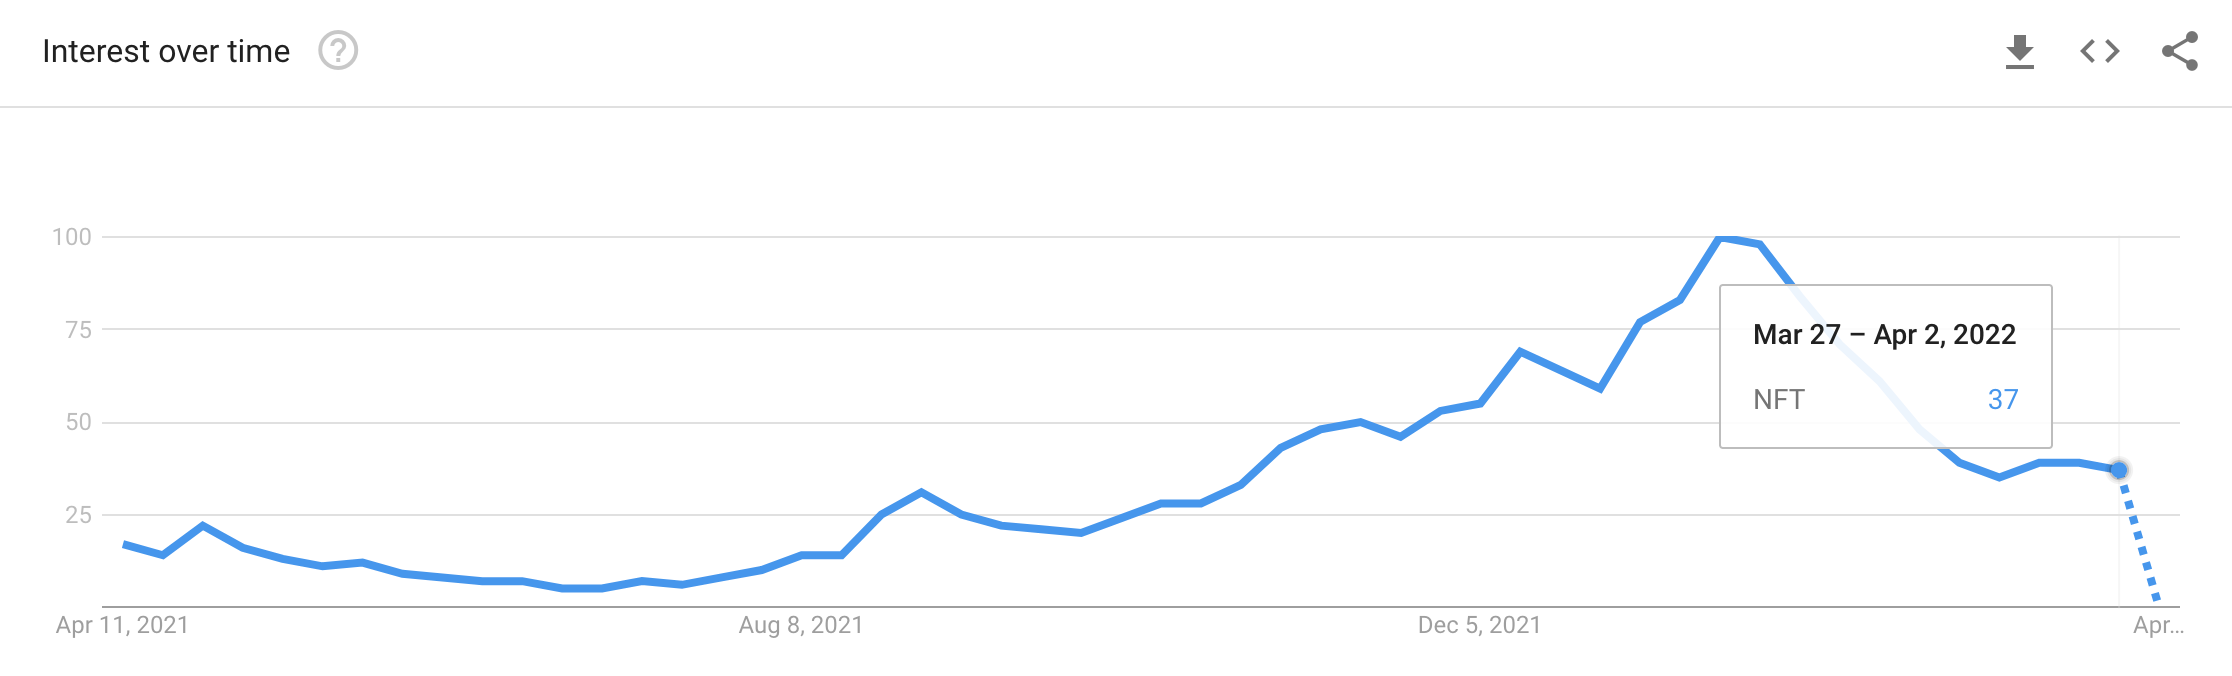 Google Trends also reflect declining interest in NFTs